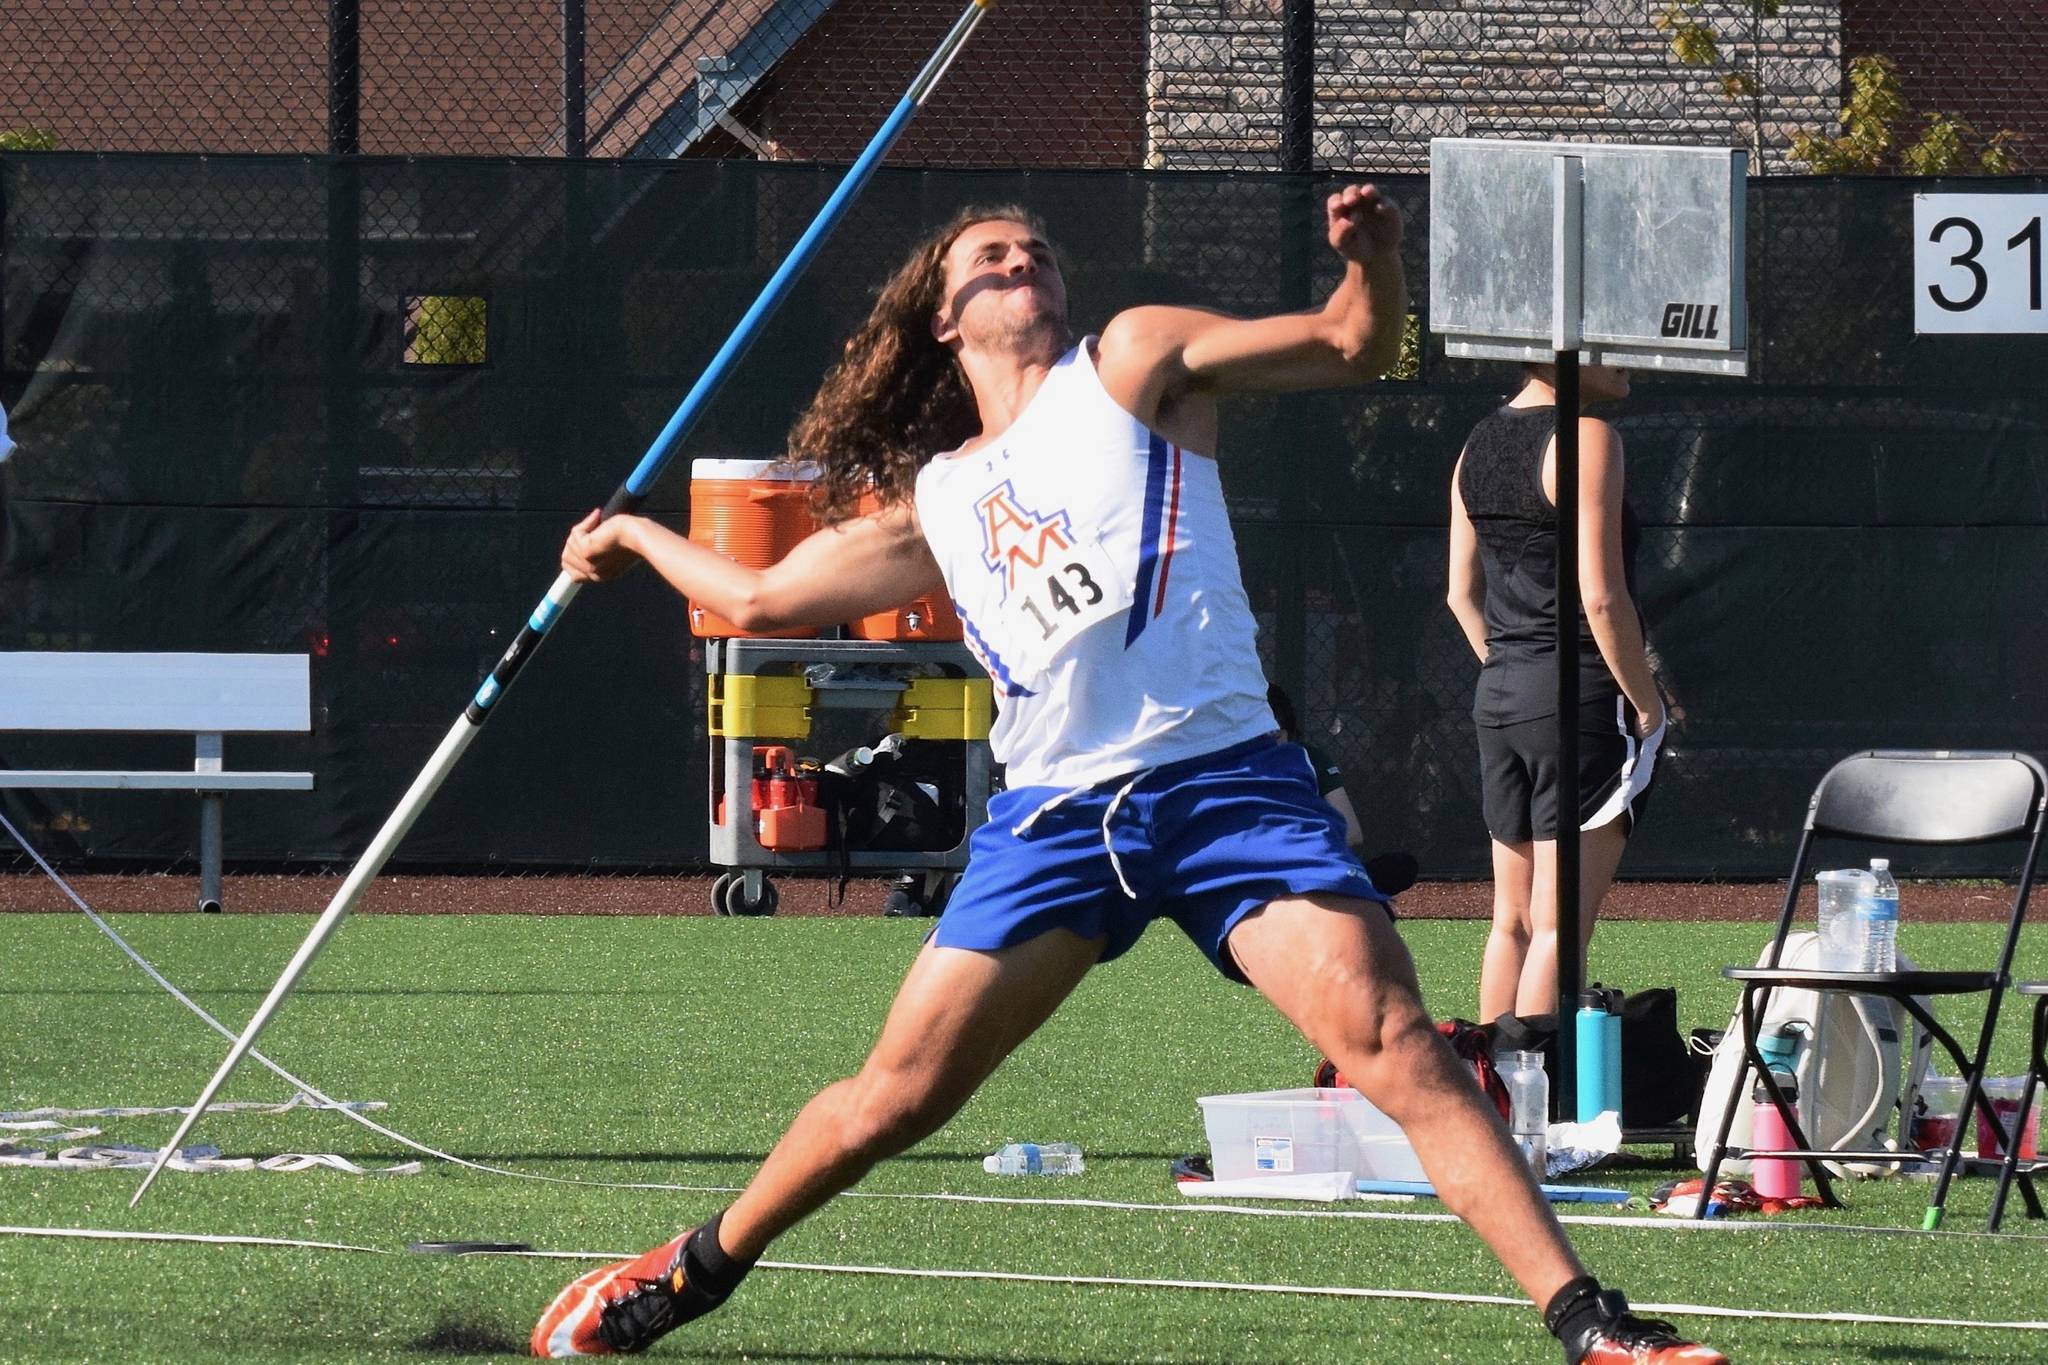 Auburn Mountainview’s Anthony Gonzales was at his best Wednesday, throwing a school-record 185 feet to take the NPSL javelin title. RACHEL CIAMPI, Auburn Reporter